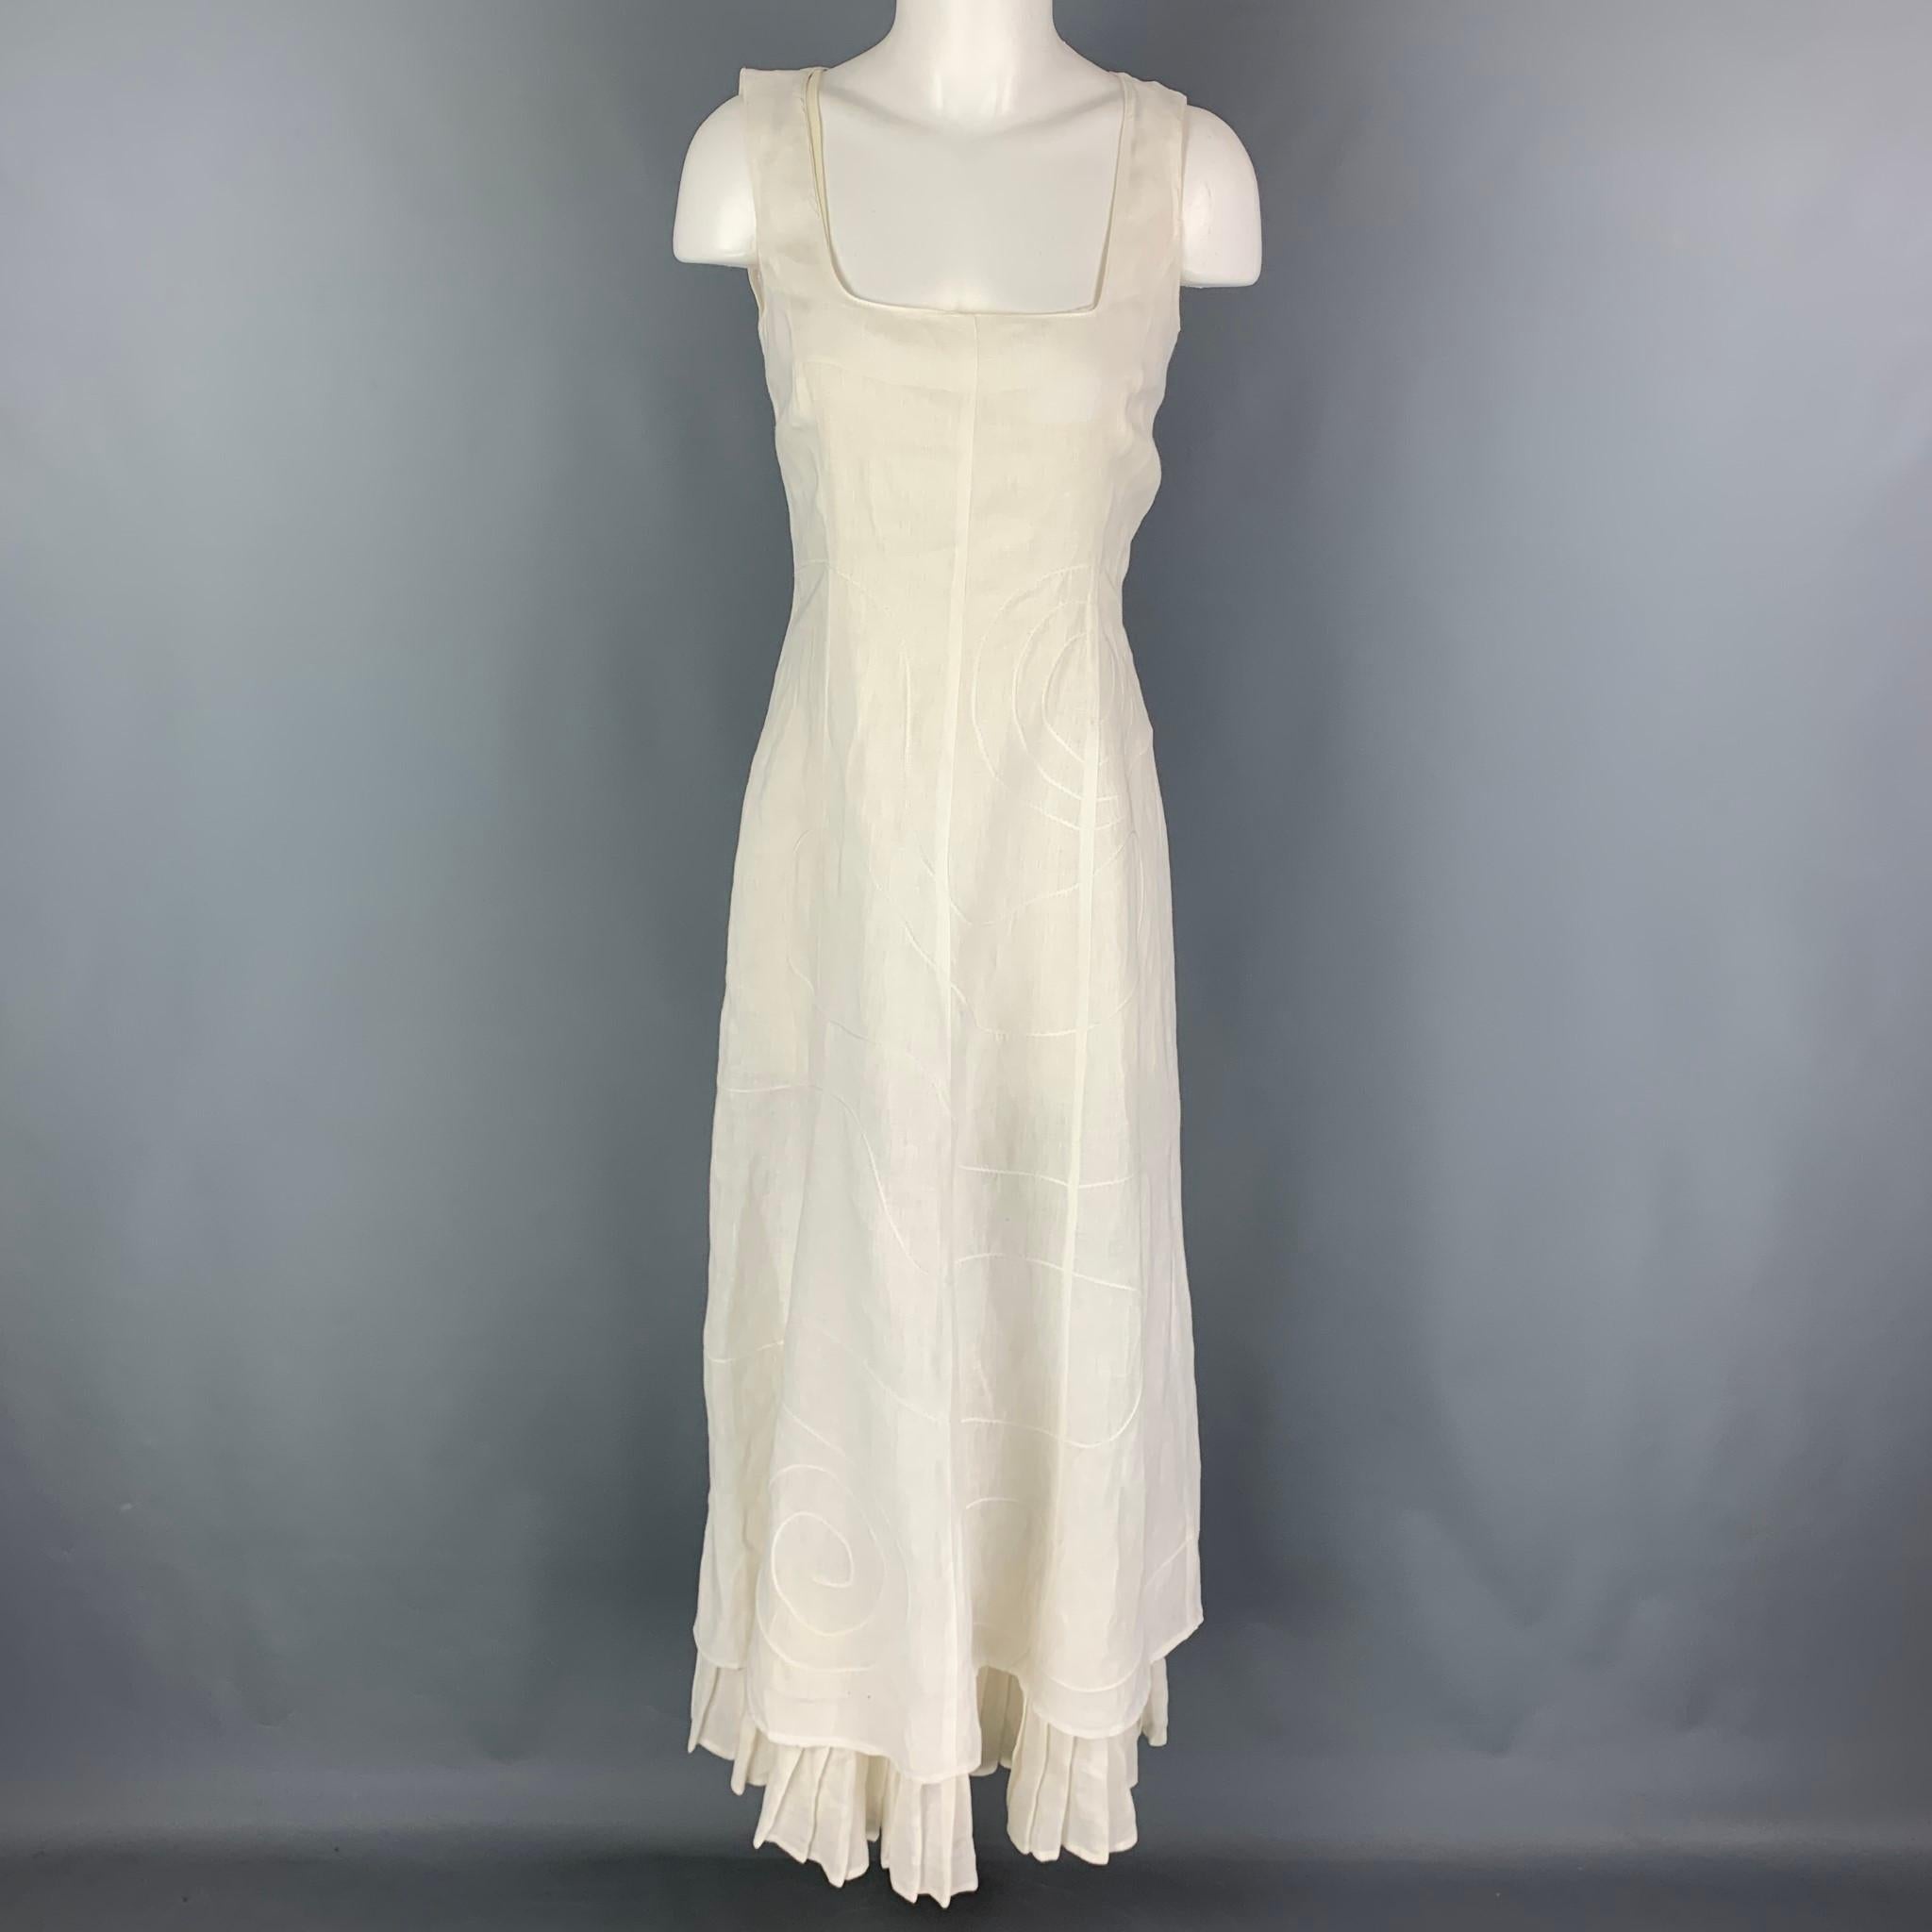 SONIA SPECIALE dress comes in a white material with a removable liner featuring embroidered designs, ruffled, sleeveless, and a back zipper closure. Made in Italy. 

Good Pre-Owned Condition. Light marks. As-is.
Marked: 44

Measurements:

Bust: 34